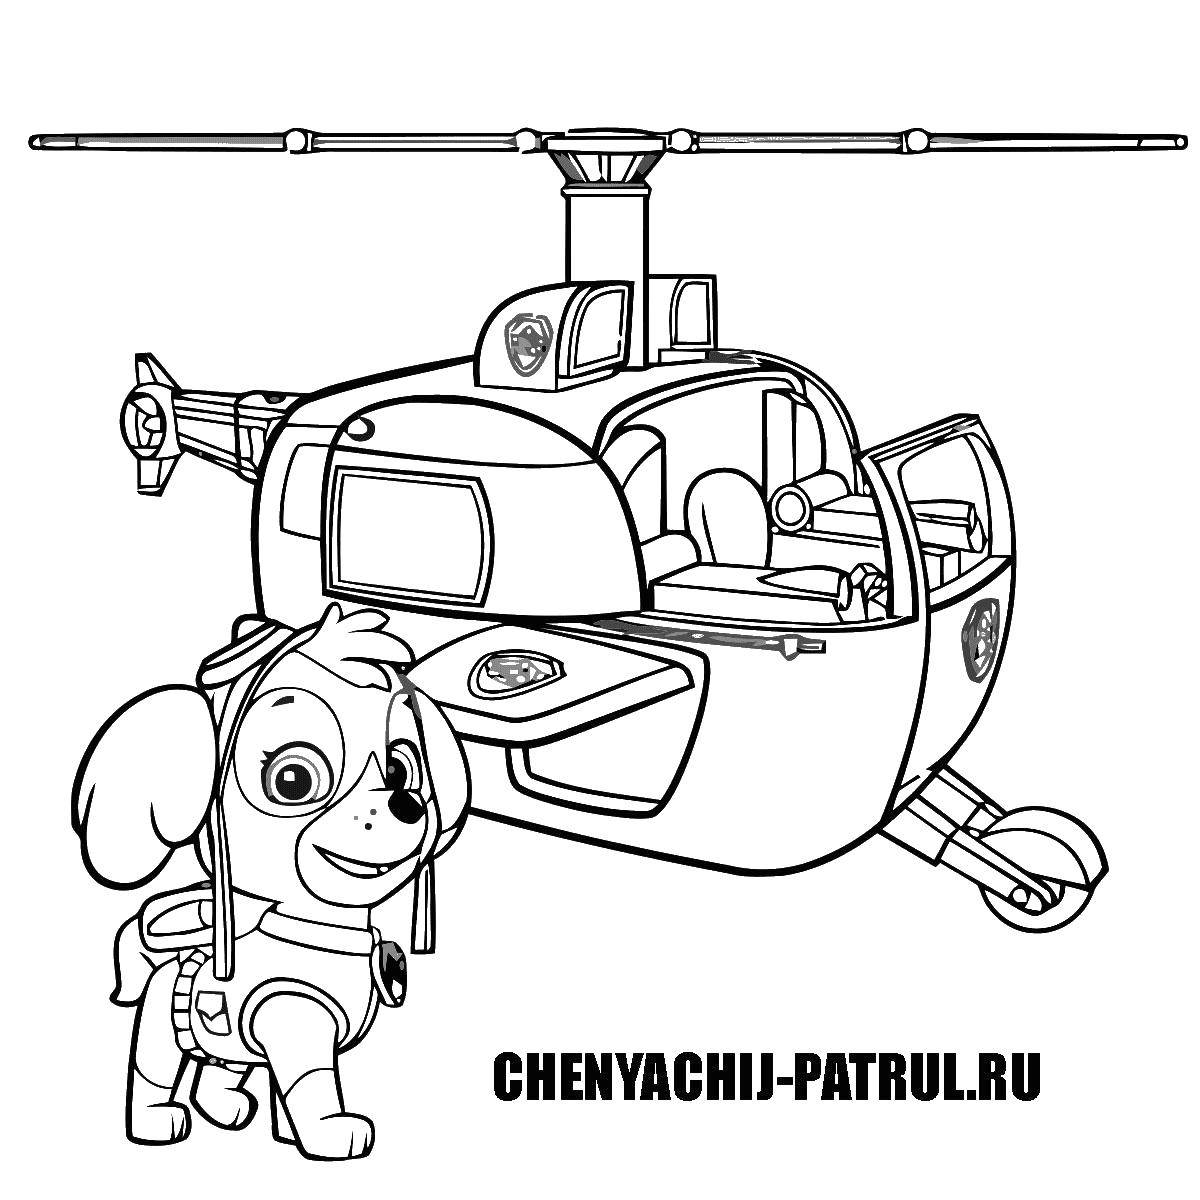 Coloring Skye and her helicopter. Category Characters cartoon. Tags:  sky, helicopter.